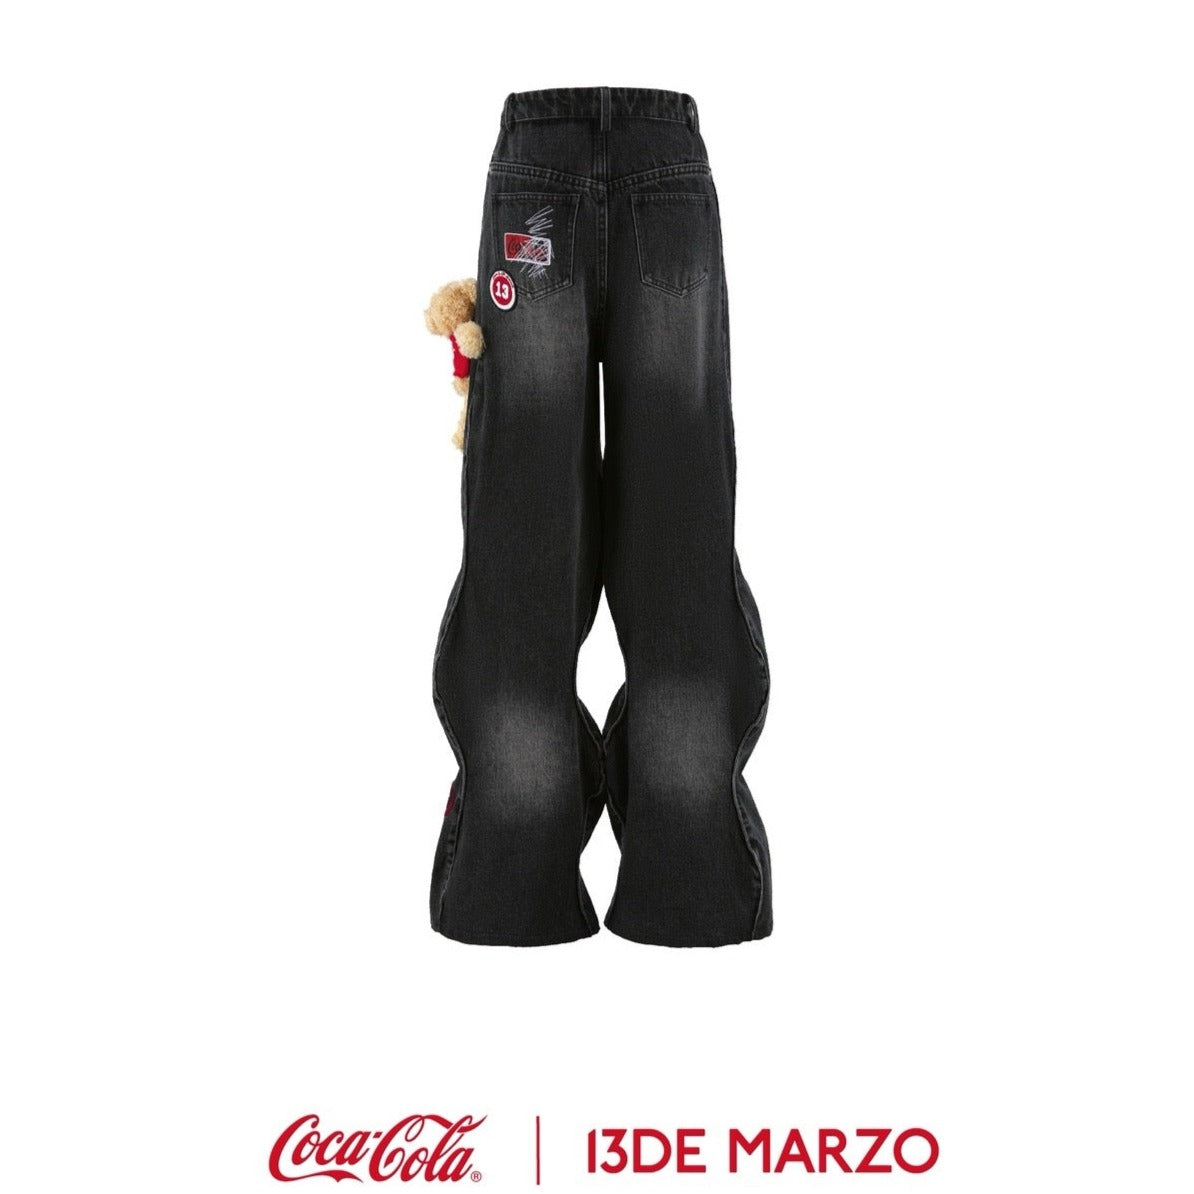 13DE MARZO x Coca-Cola Bear Curved Jeans Washed Black